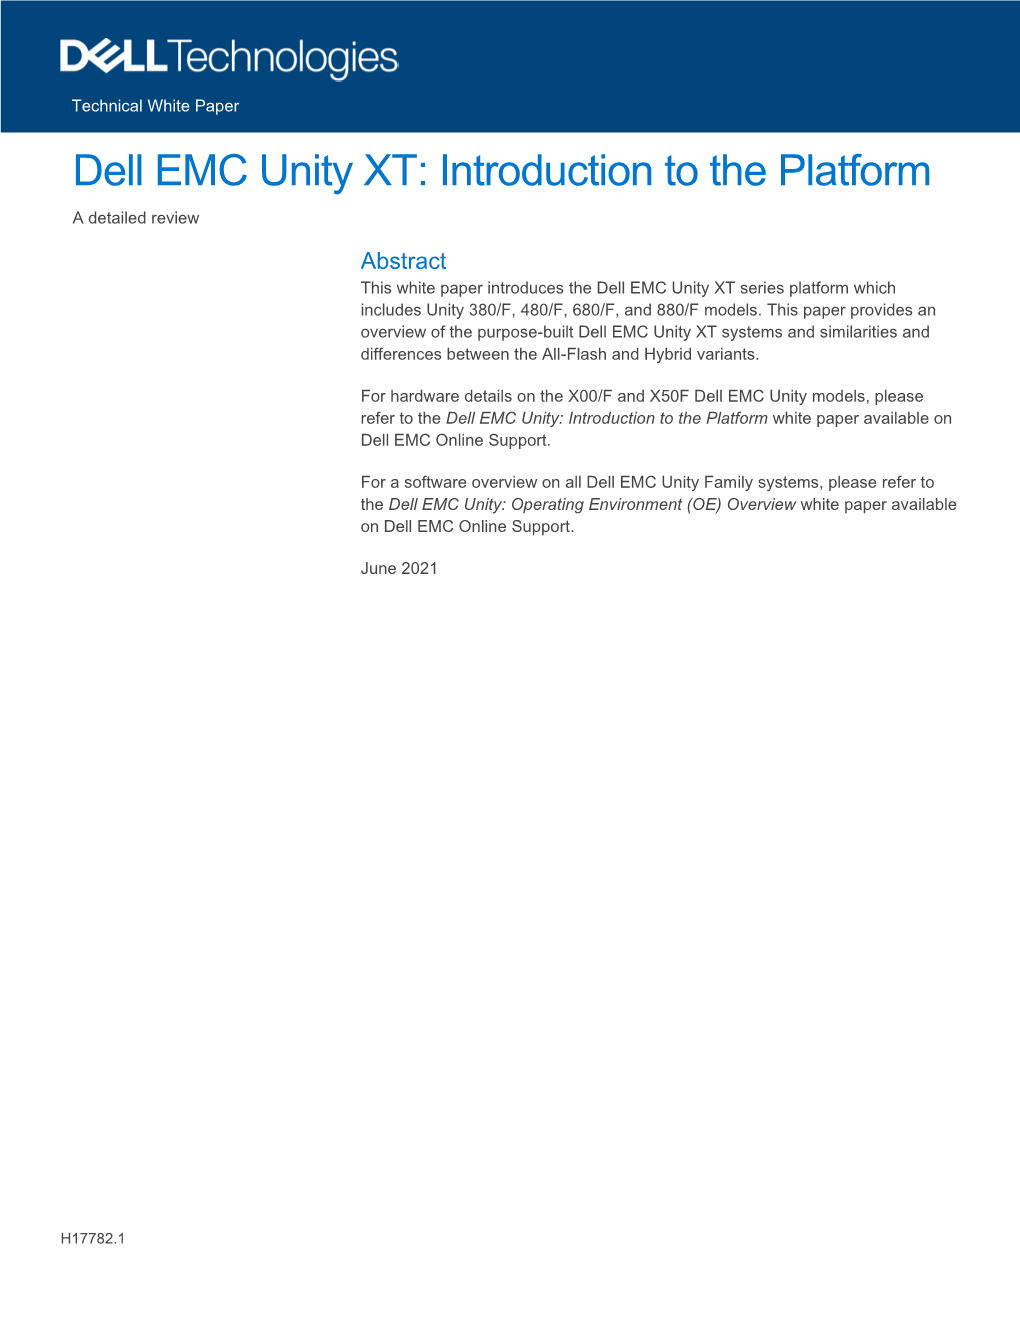 Dell EMC Unity XT: Introduction to the Platform a Detailed Review